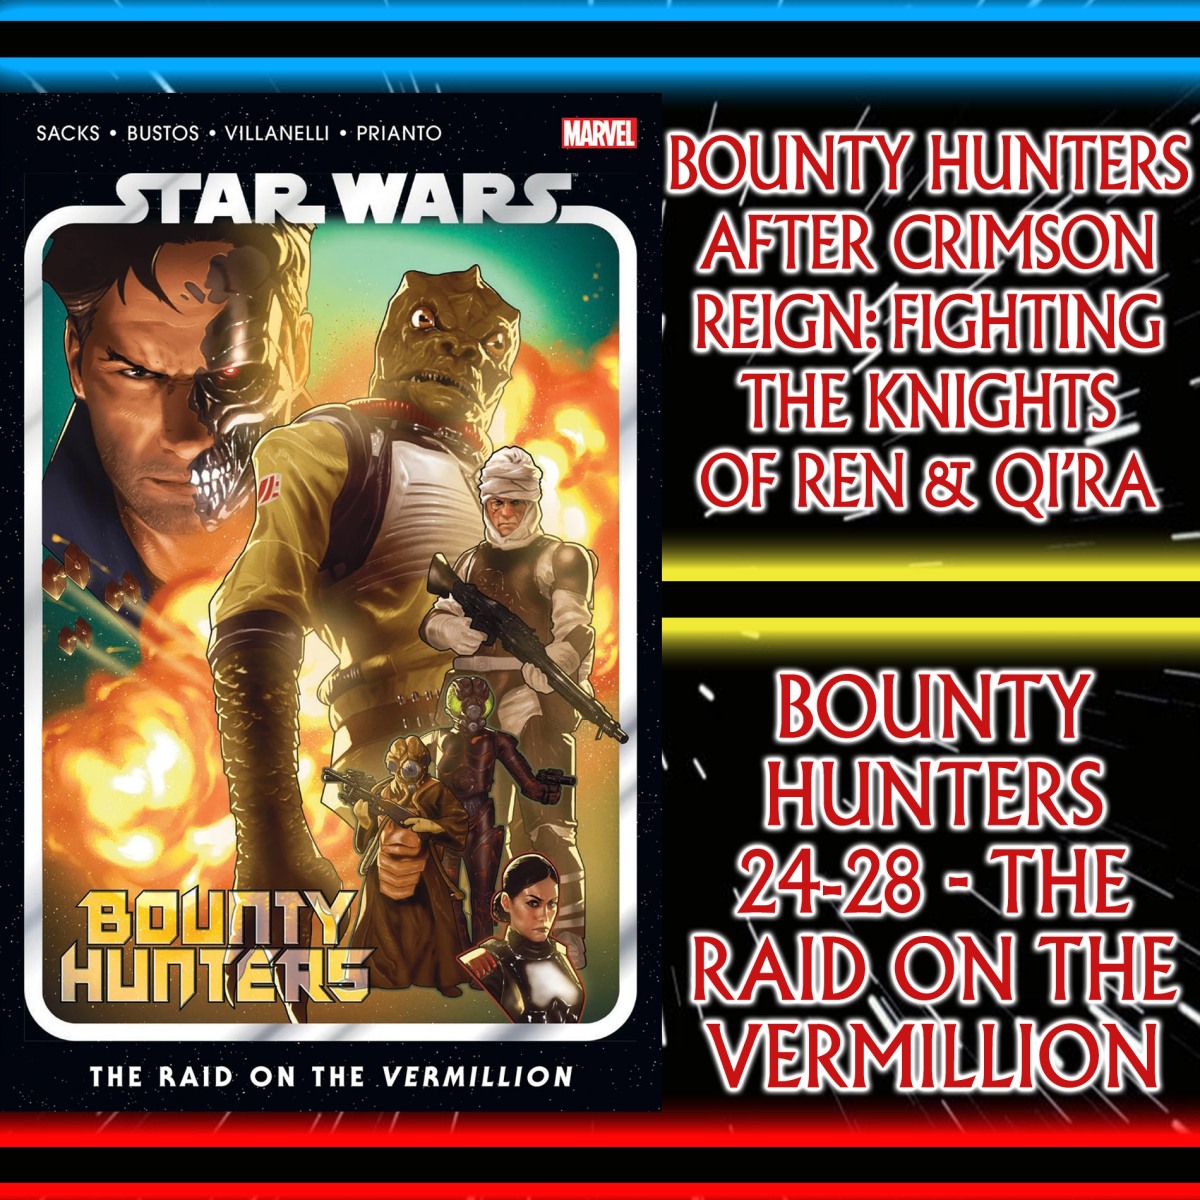 Star Wars: Comics In Canon – Bounty Hunters After Crimson Reign: Fighting The Knights Of Ren & Qi’ra, Plus Valance Again Clashes With Vader (Bounty Hunters Vol 5: Raid On The Vermillion #24-28) – Ep 114